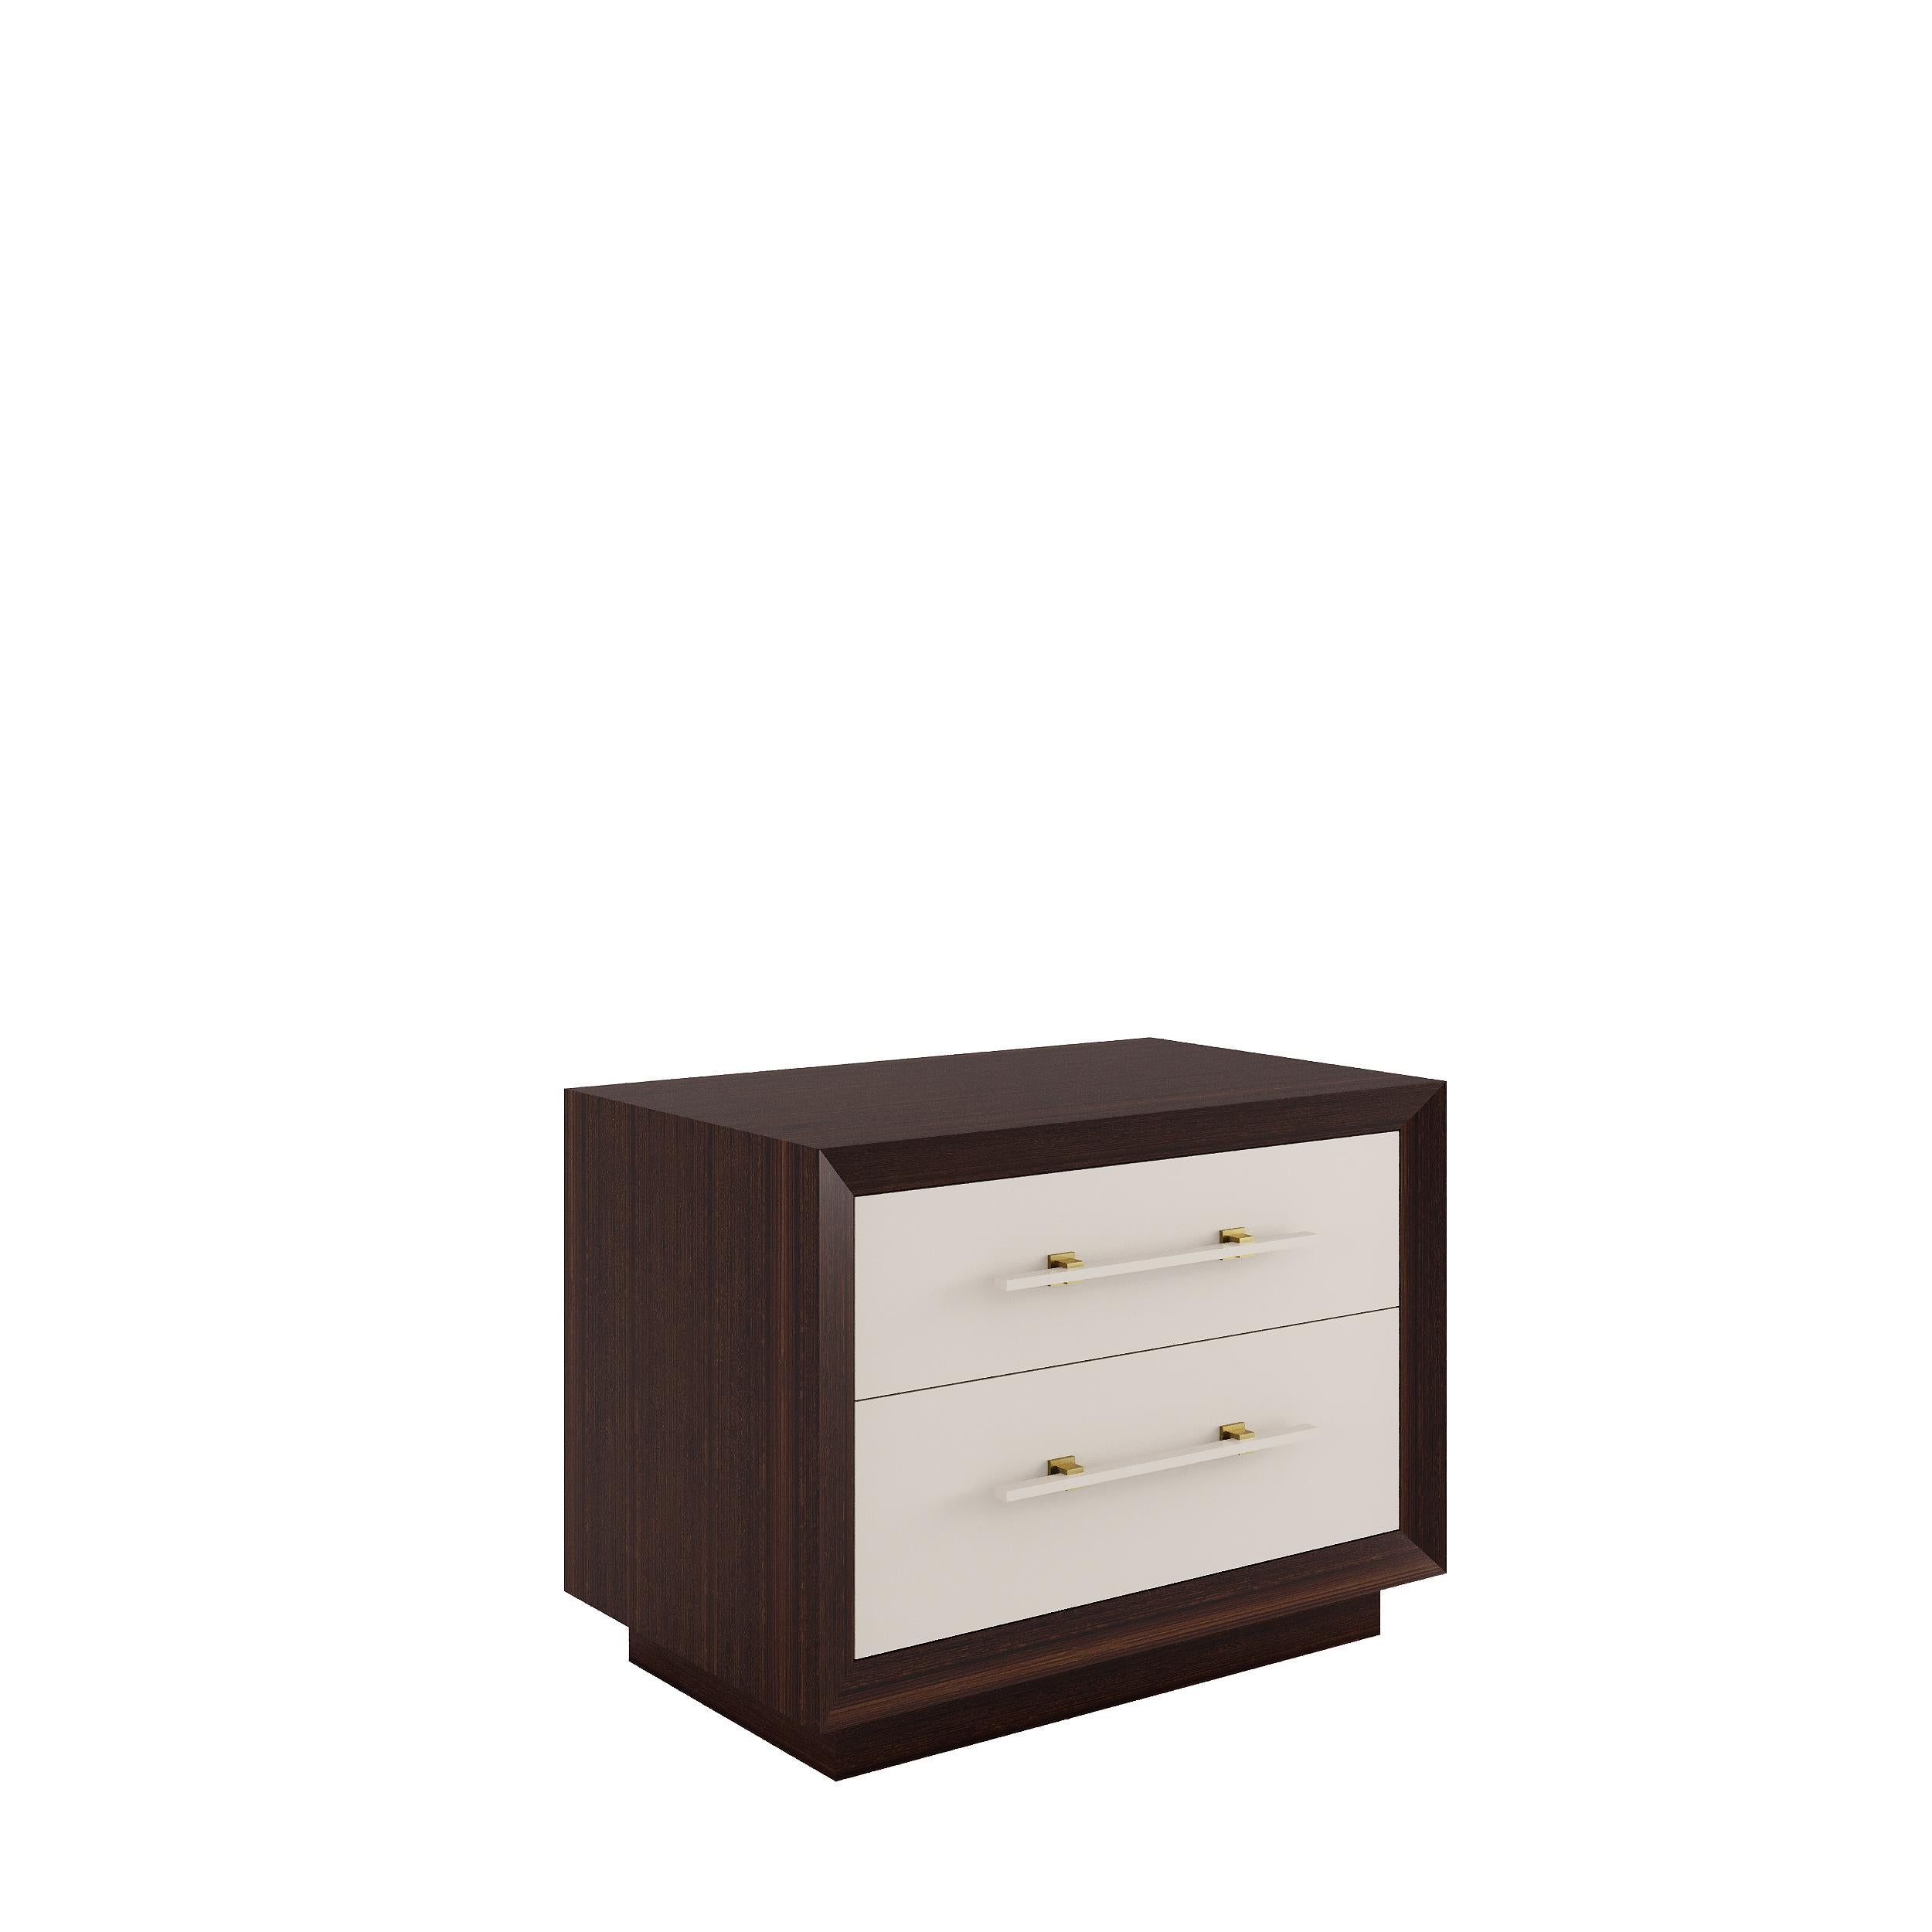 MAGNA is a robust and elegant nightstand, made of veneered wood with two lacquered drawers and embellished with brass details.‎ 

Finished in lacquer or veneered wood or simply combining both.

Primary image: shown in glossy Eucalyptus Fumé